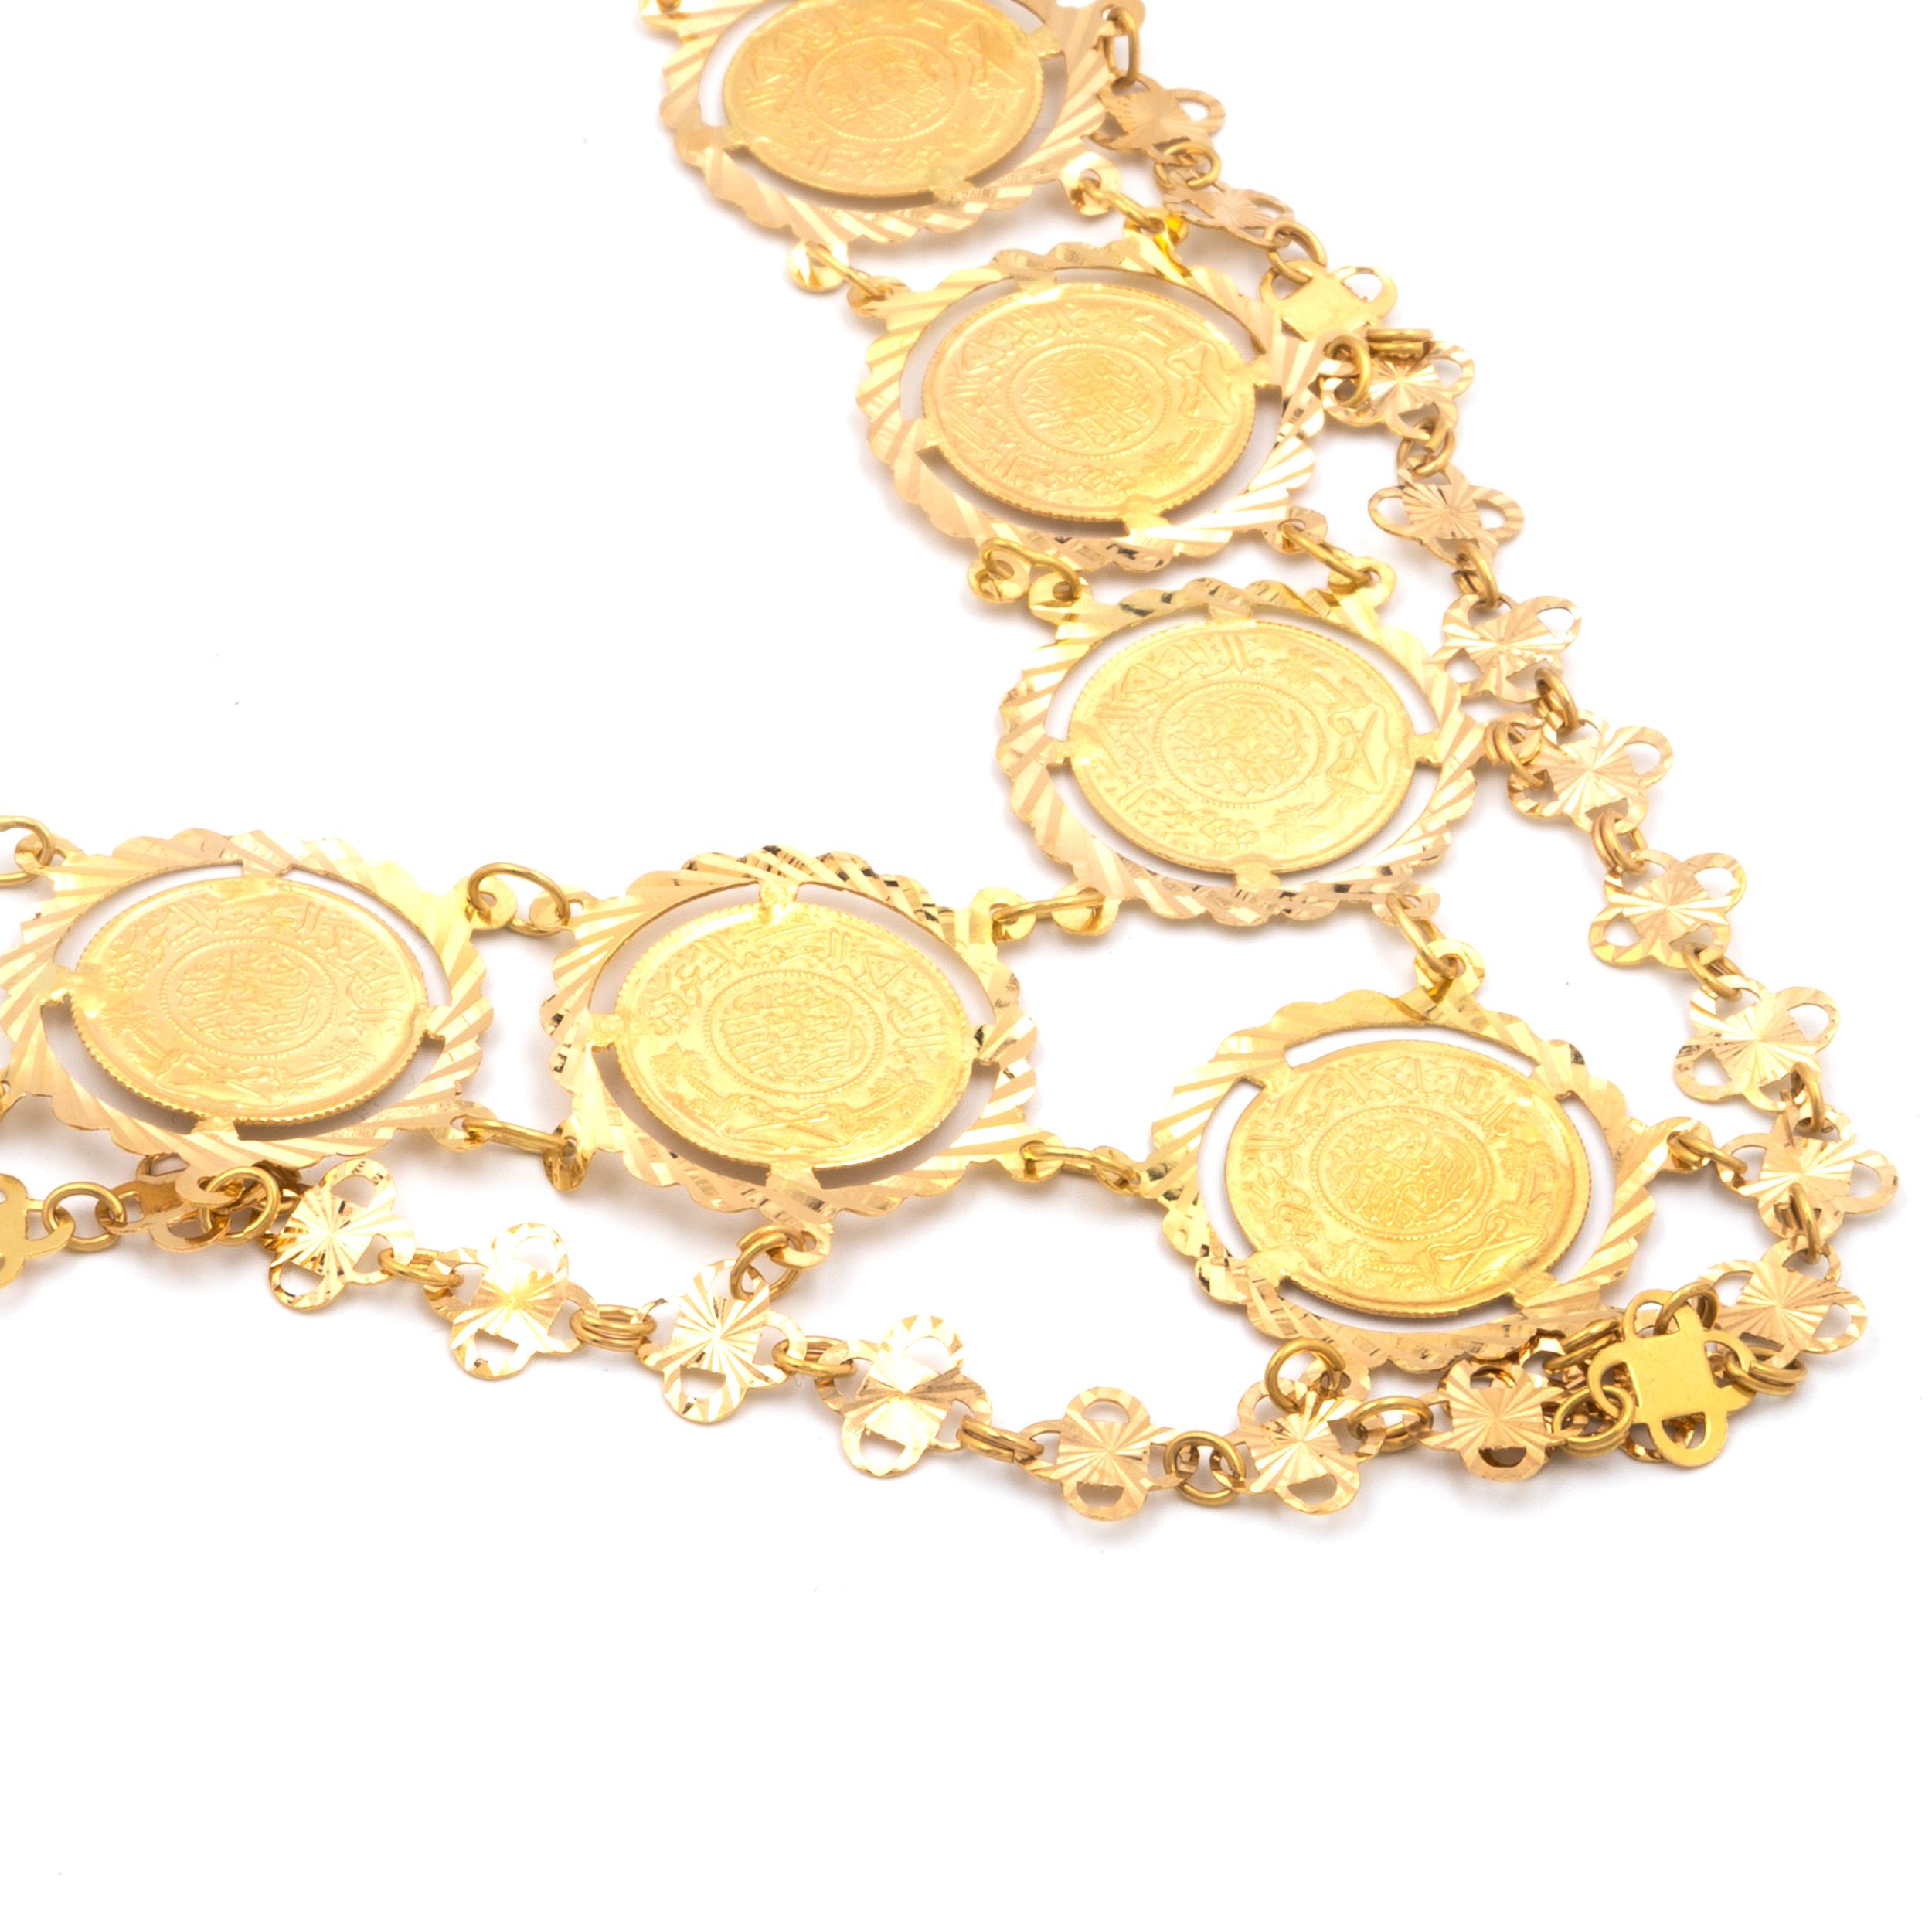 US Liberty 1881 Gold Coin Necklace | $0 CDB Jewelry